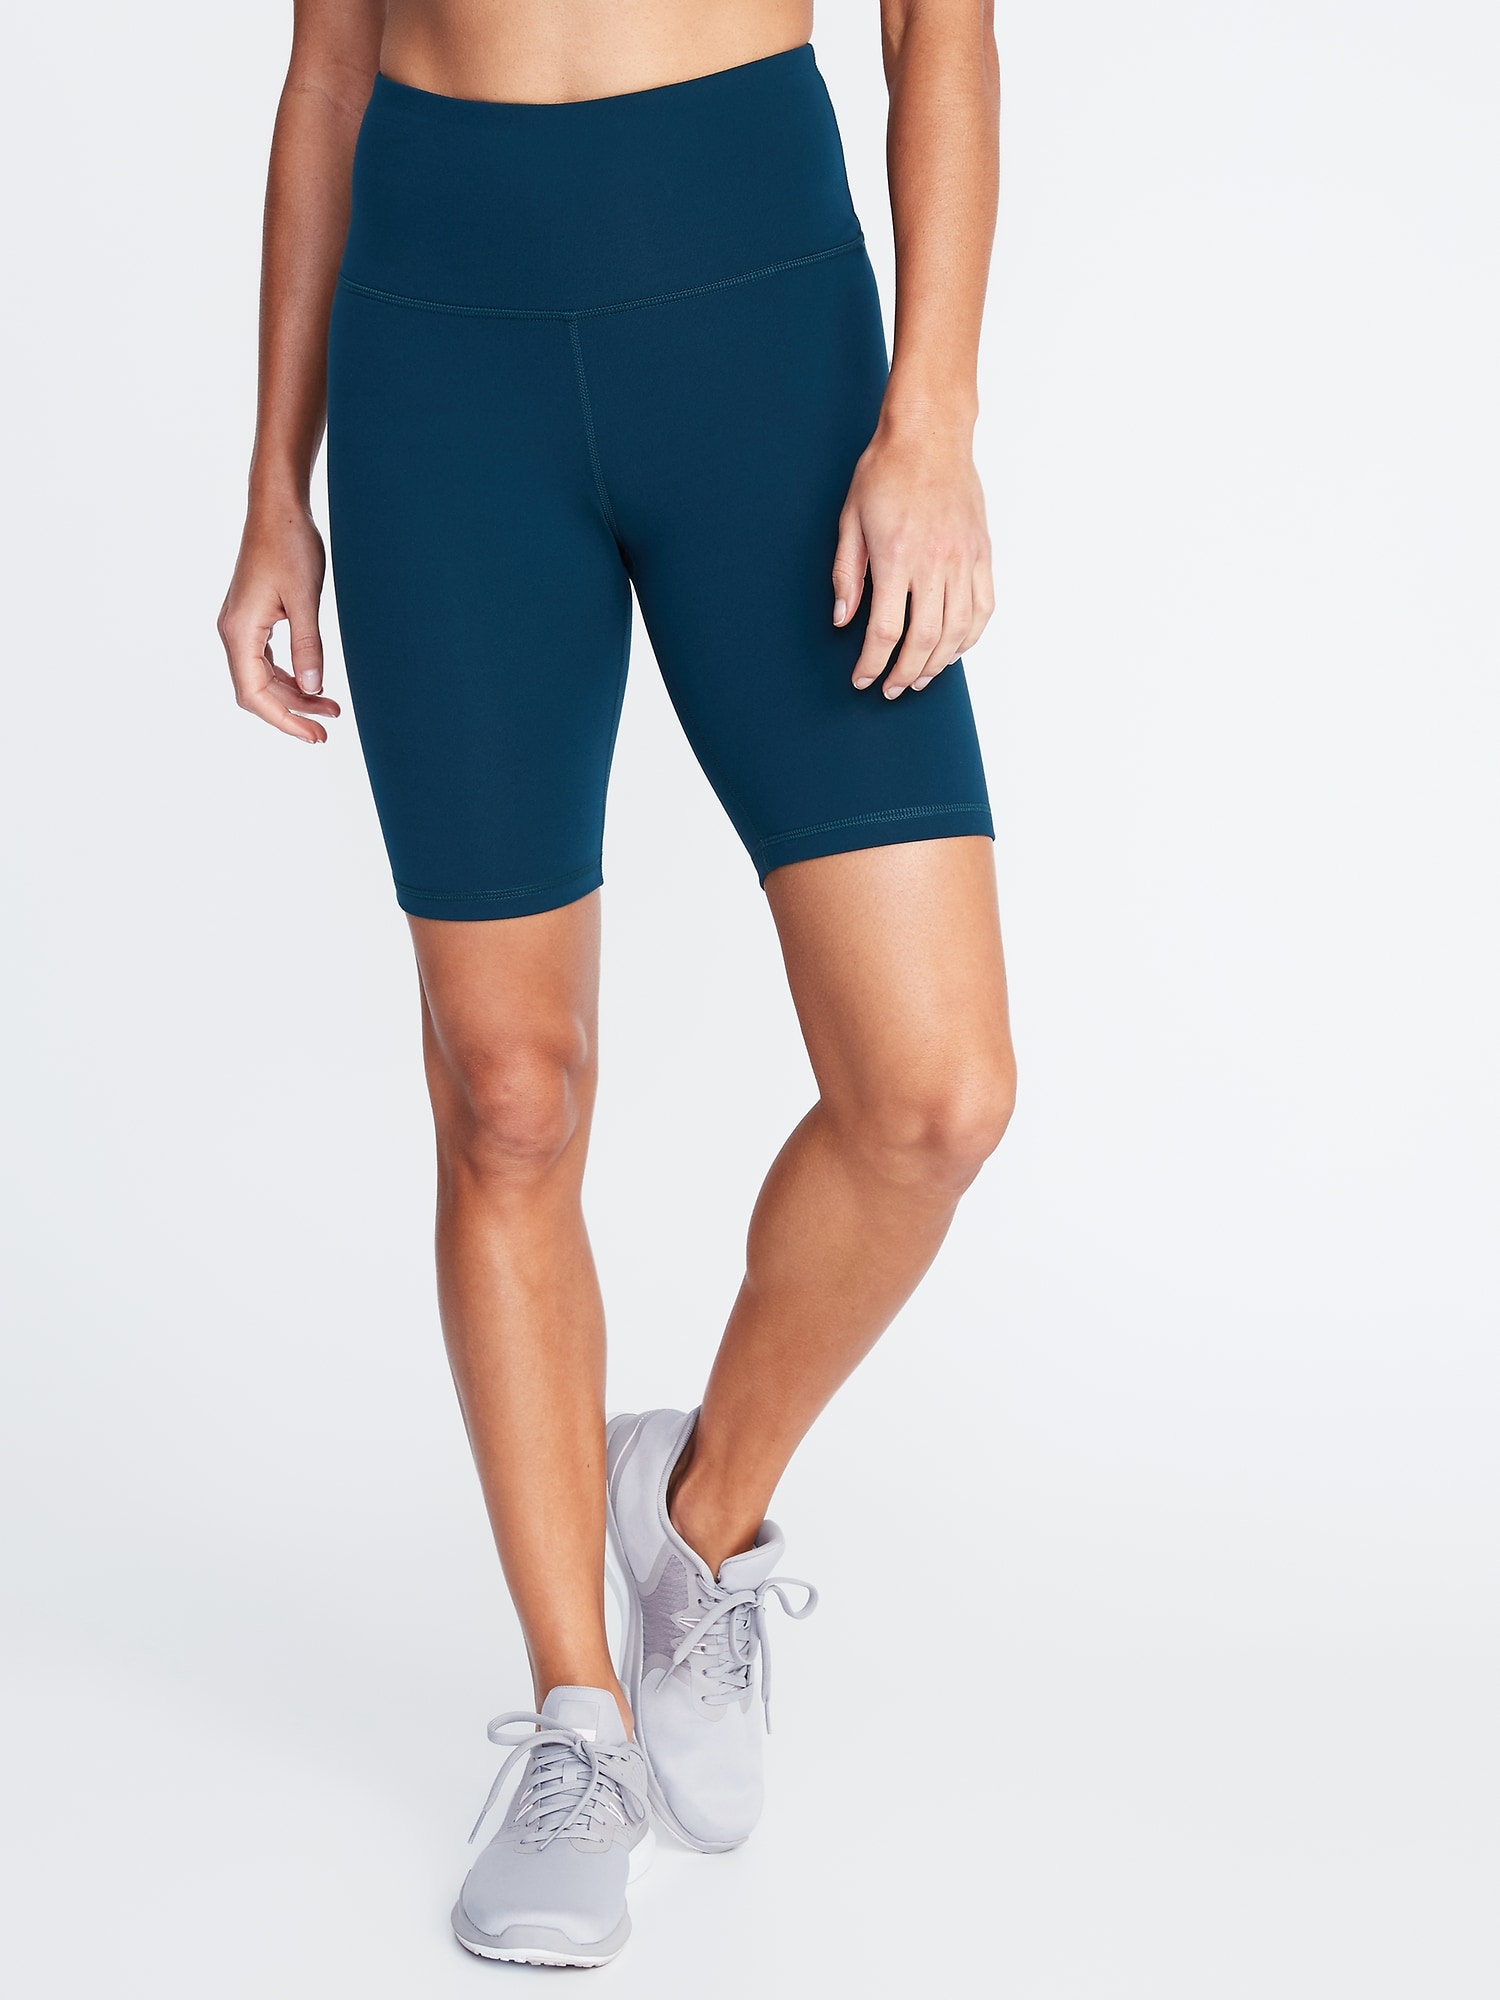 Old Navy High-Waisted Elevate Compression Bermuda Shorts For Women - 8-Inch Inseam